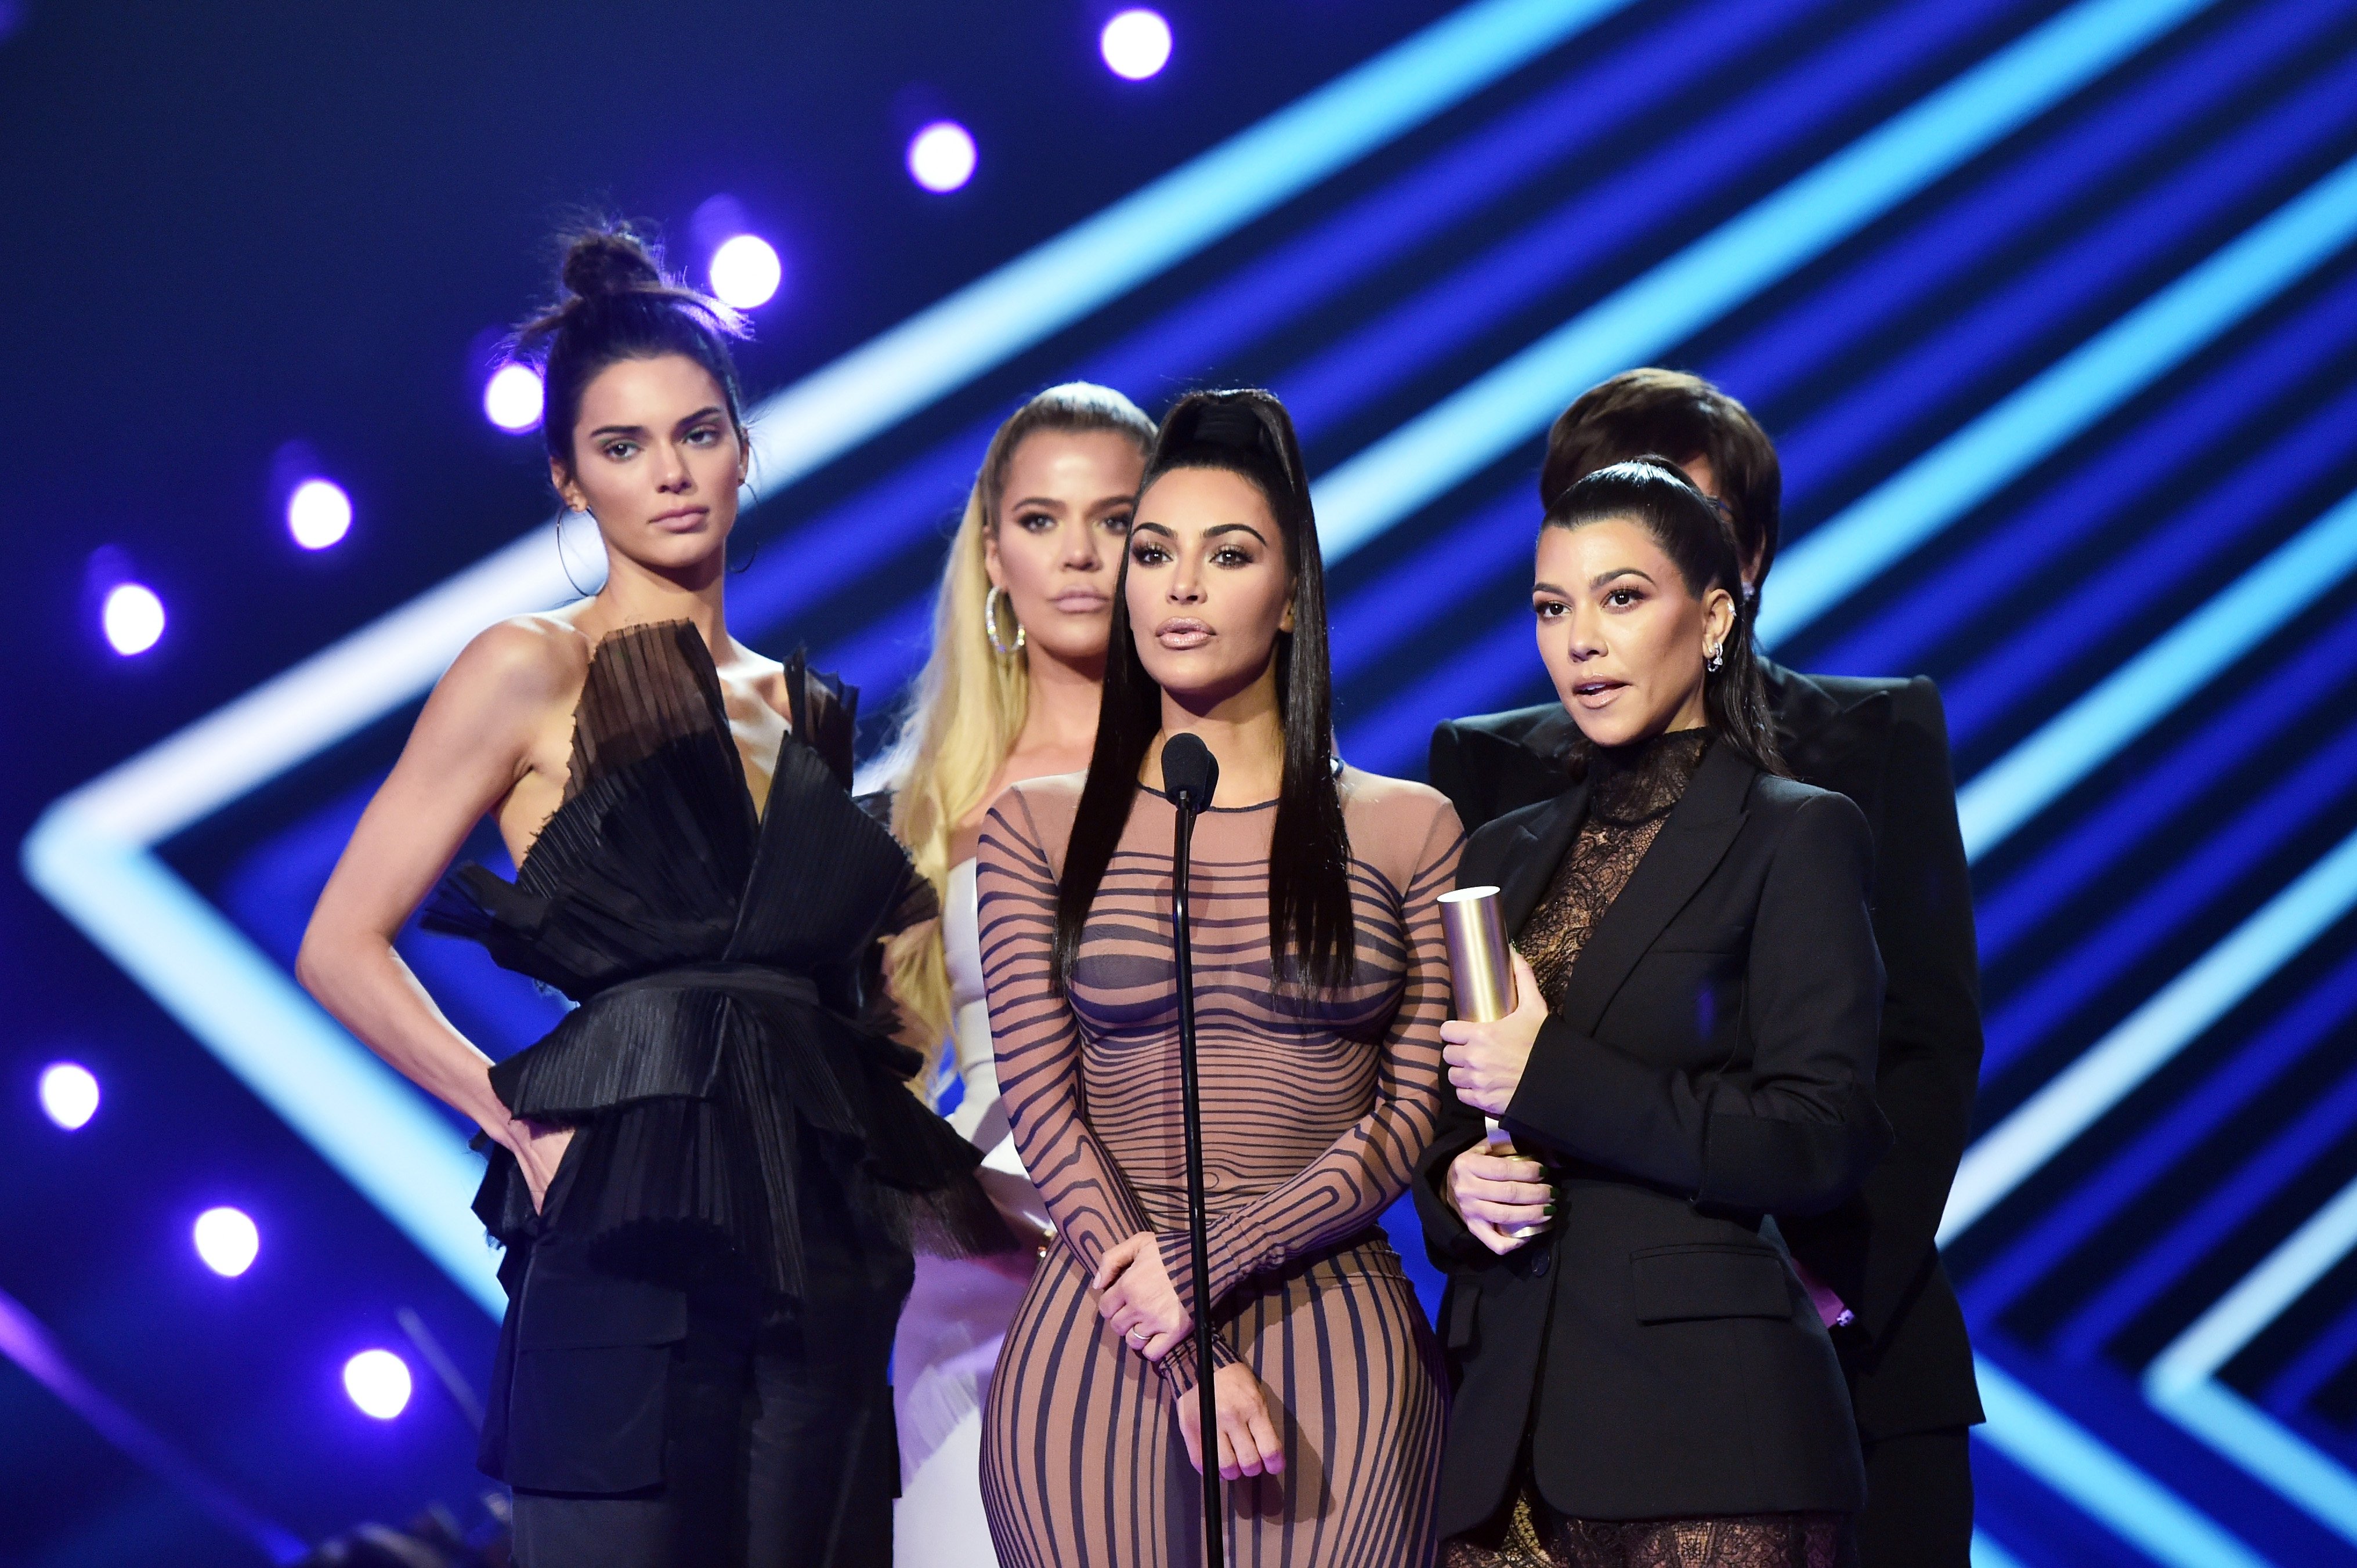 Khloe, Kim, and Kourtney Kardashian with Kris and Kendal Jenner on stage at E! People's Choice Awards at the Barker Hangar, Santa Monica, California, on November 11, 2018. | Source: Getty Images